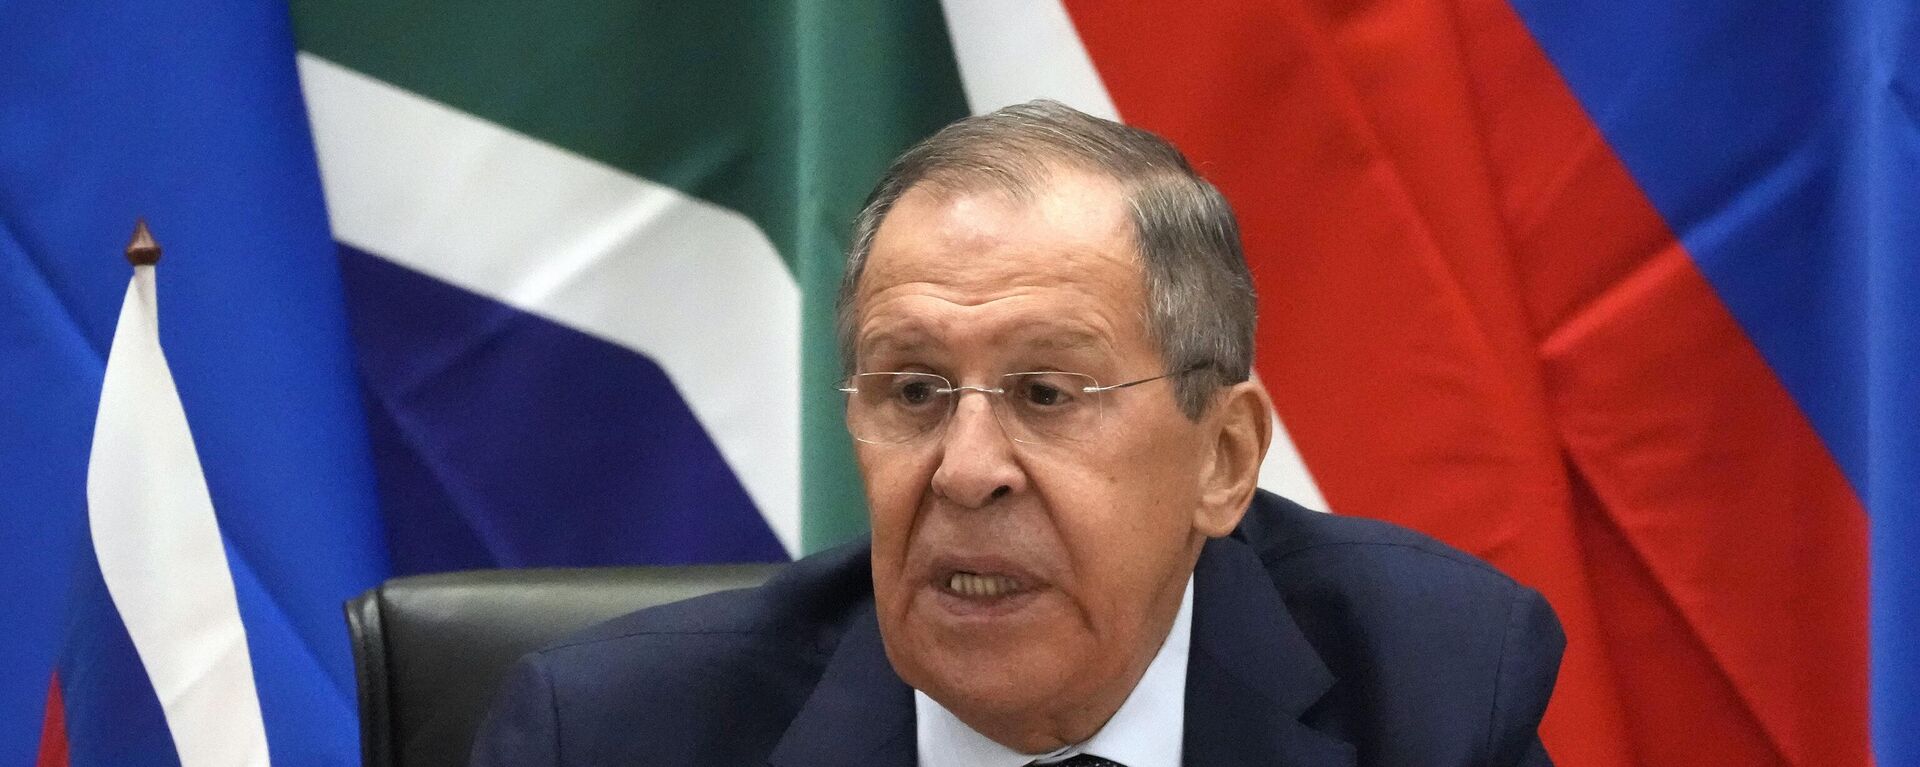 Russia's Foreign Minister Sergey Lavrov speaks during a media briefing after meeting with his South Africa's counterpart Naledi Pandor in Pretoria, South Africa, Monday, Jan. 23, 2023.  - Sputnik Africa, 1920, 24.01.2023